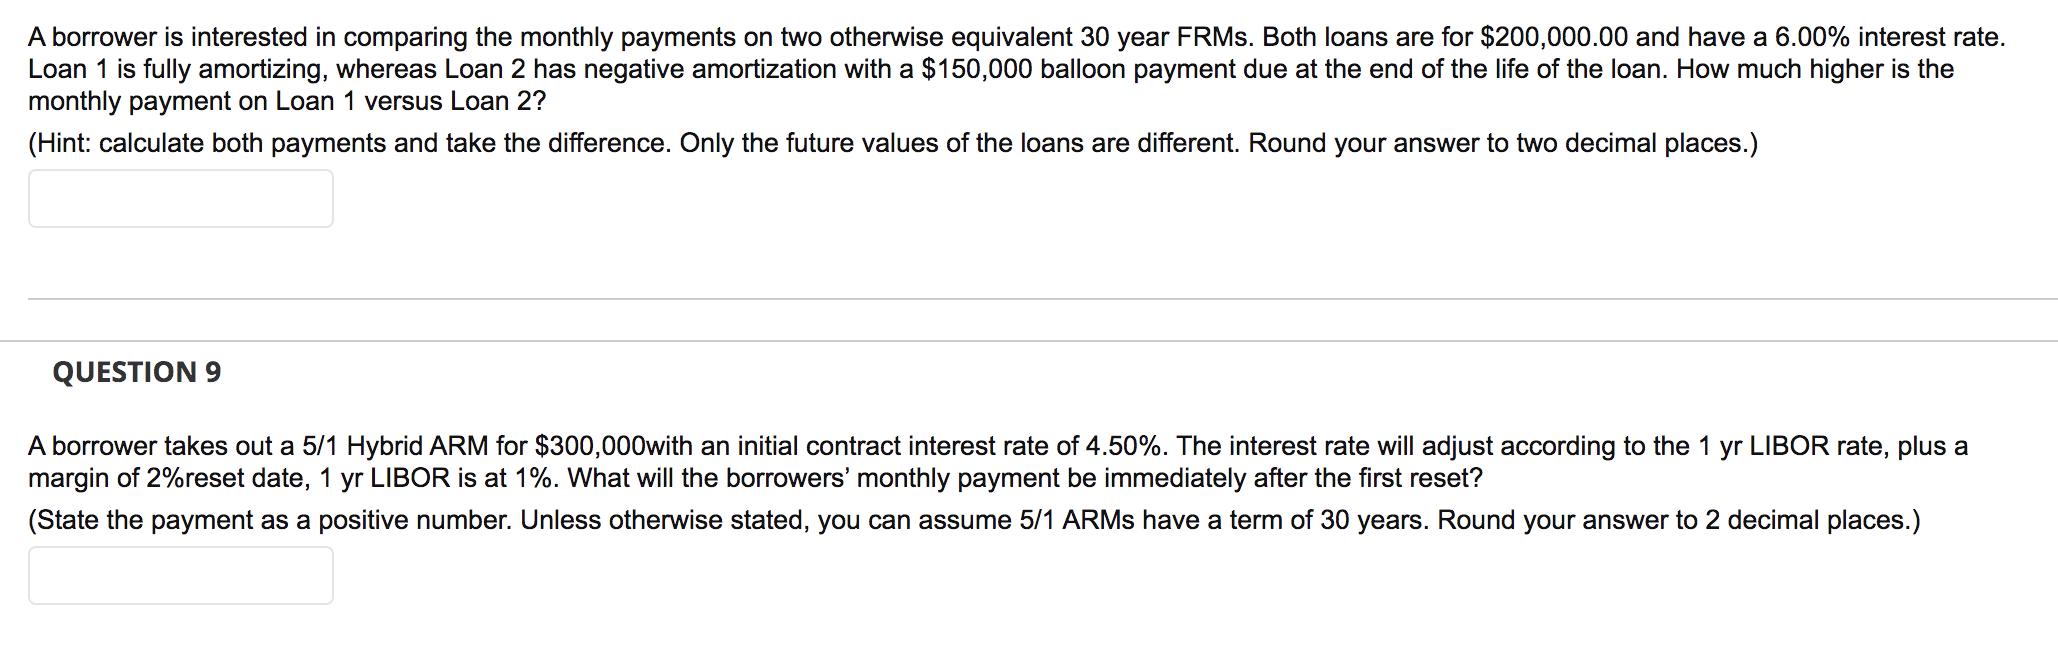 A borrower is interested in comparing the monthly payments on two otherwise equivalent 30 year FRMs. Both loans are for $200,